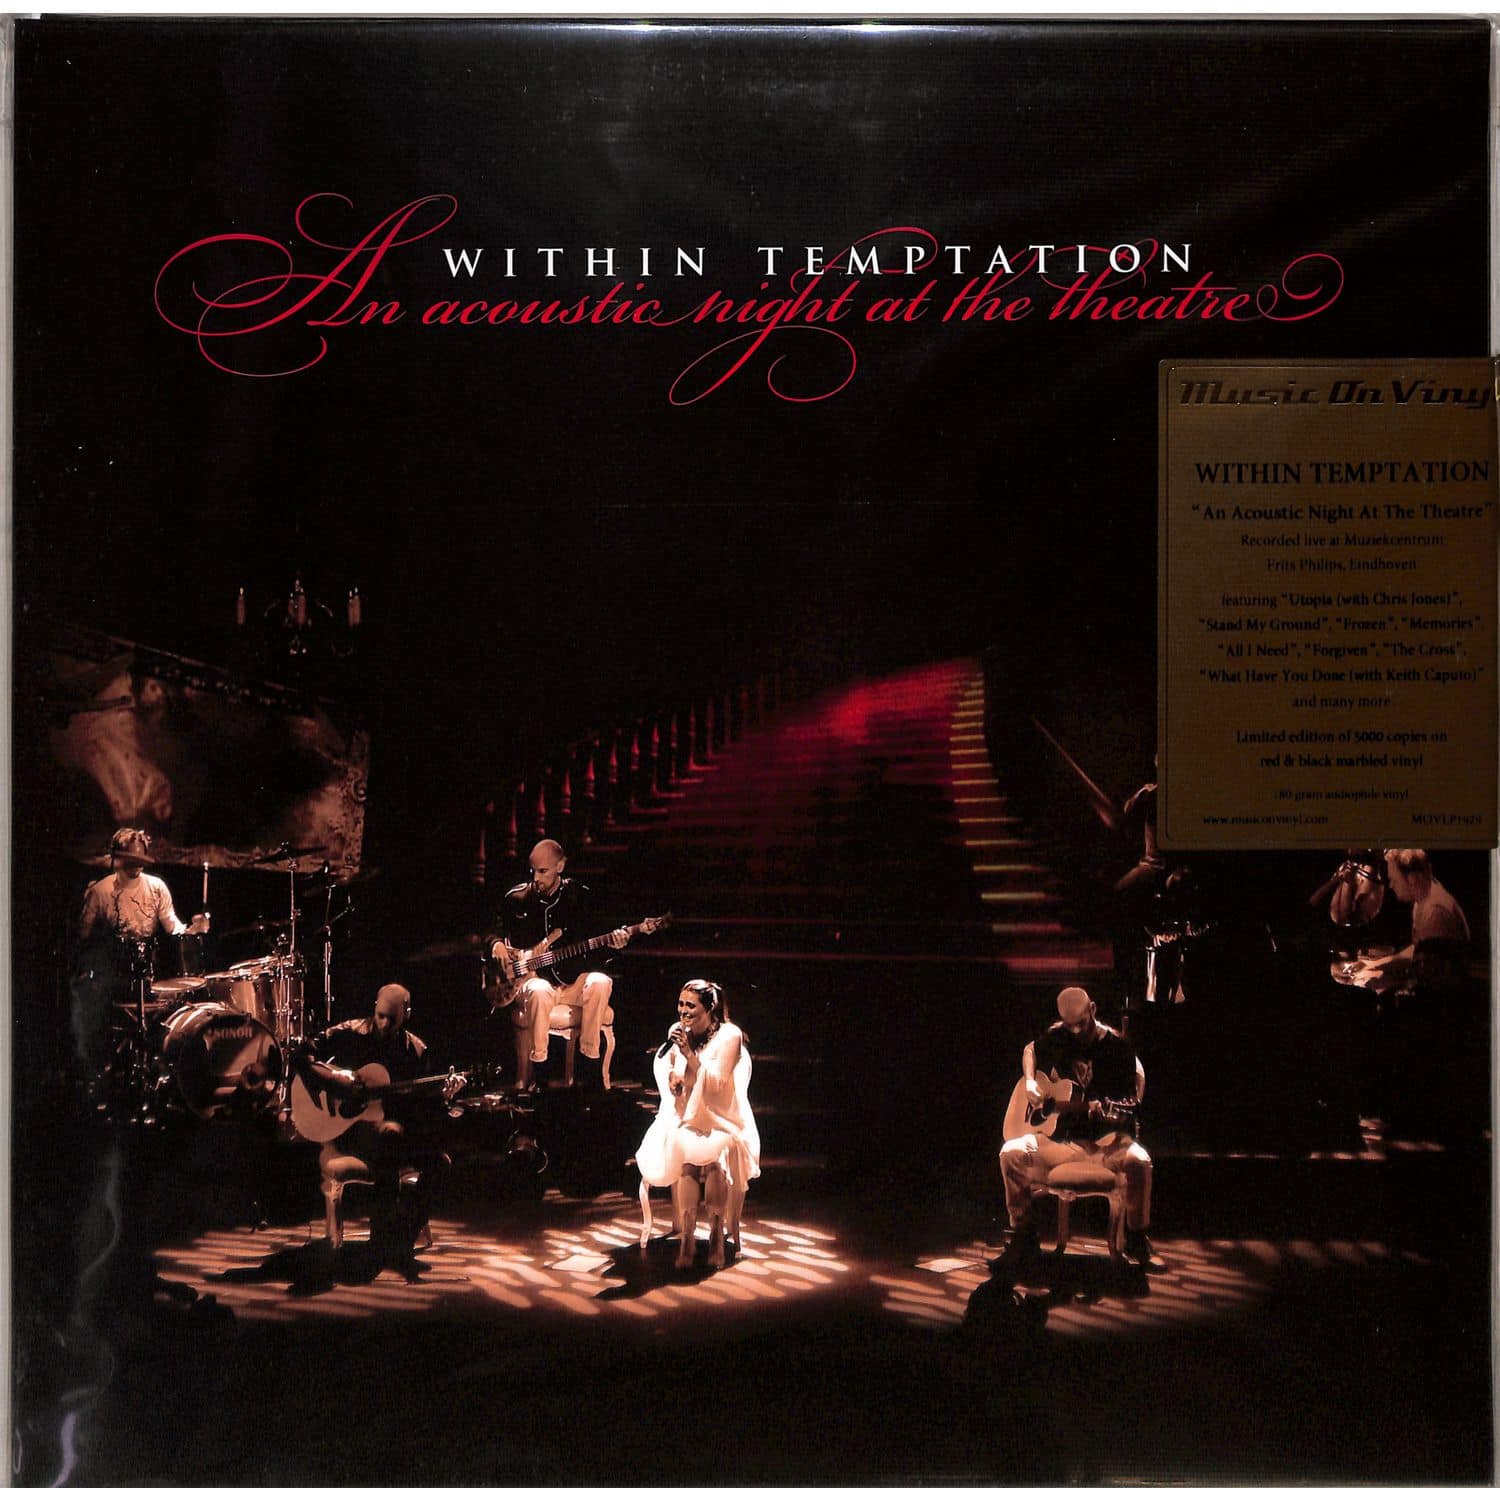 Within Temptation - AN ACOUSTIC NIGHT AT THE THEATRE 